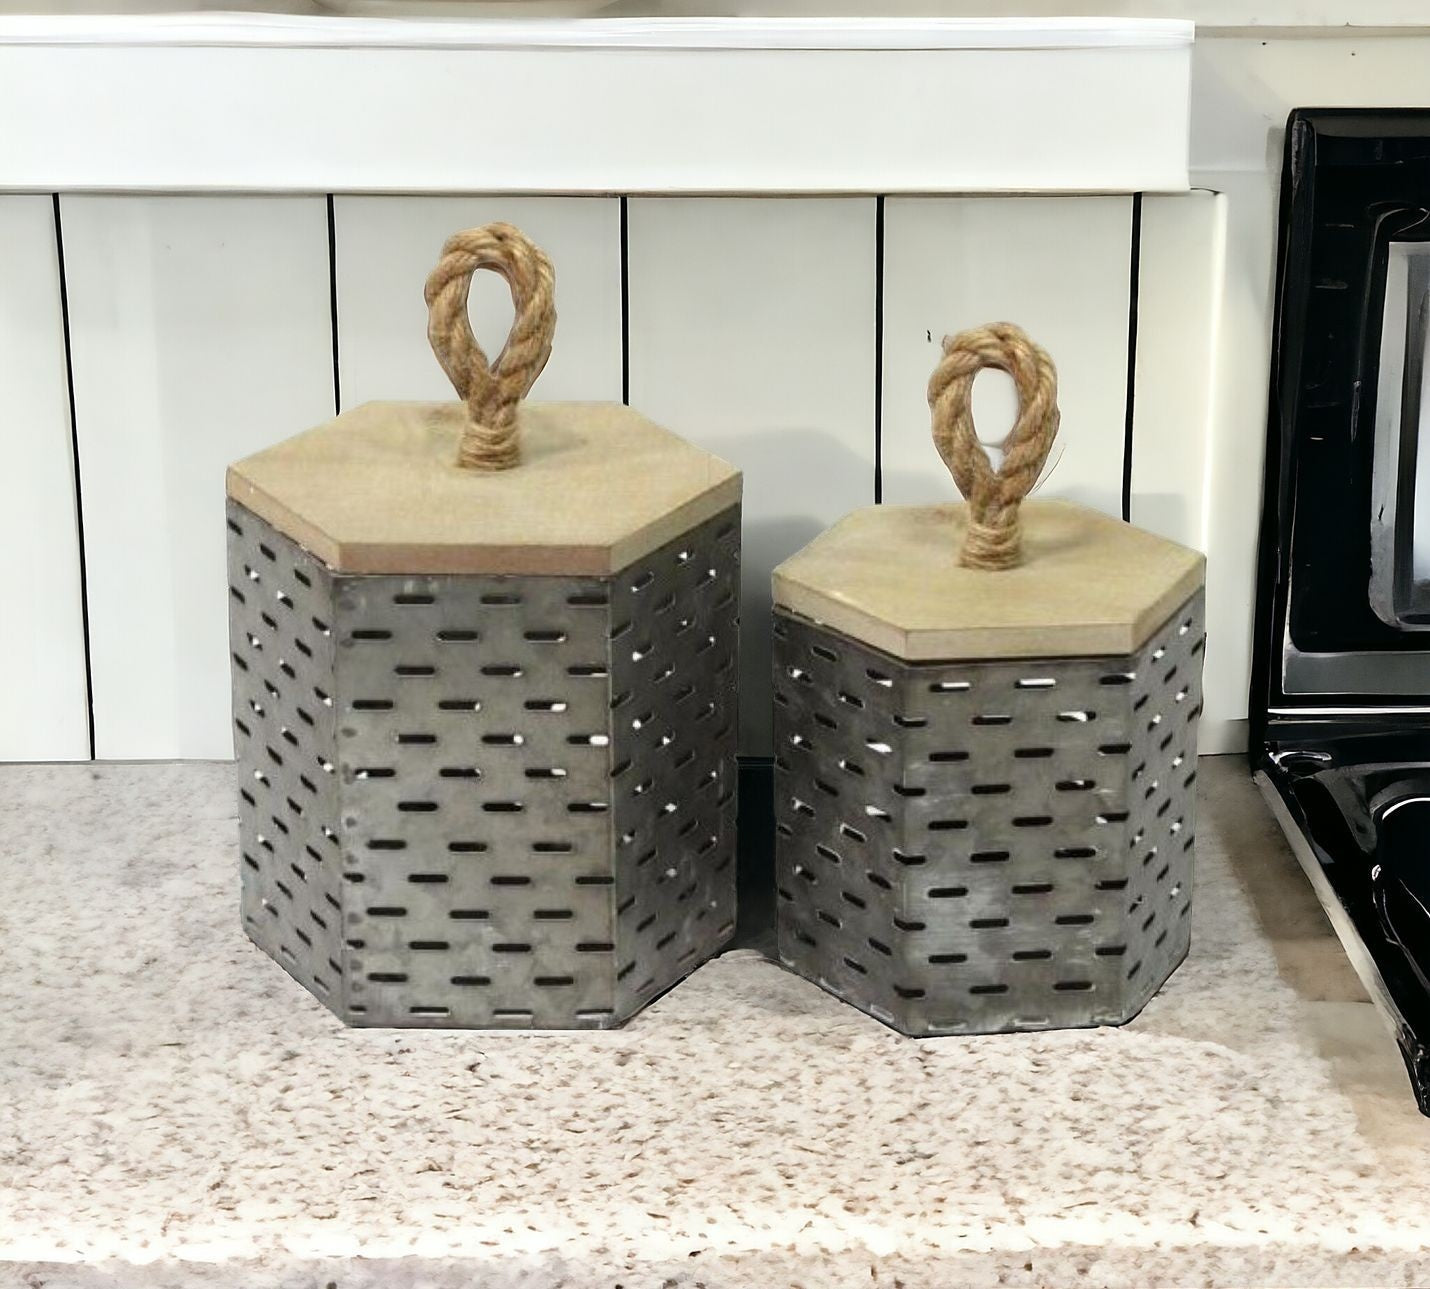 Set Of 2 Rustic Farmhouse Decorative Metal Canisters